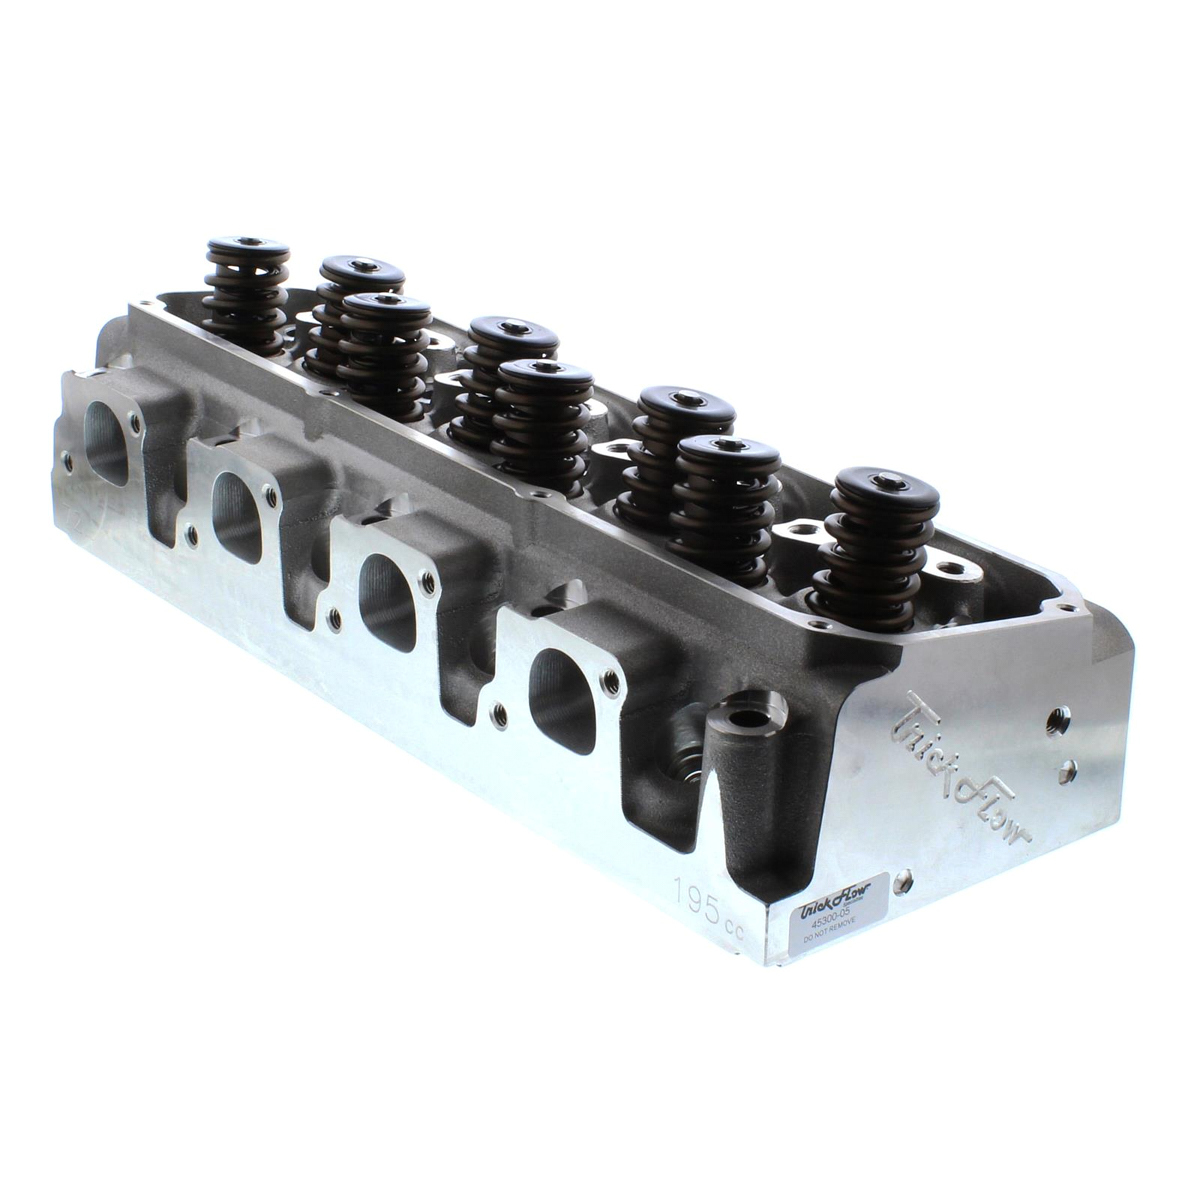 Trick Flow TFS-51617204-C00 Cylinder Head, Power Port, Assembled, 2.080 / 1.600 in Valves, 195 cc Intake, 72 cc Chamber, 1.550 in Springs, Aluminum, Ford Cleveland / Modified, Each